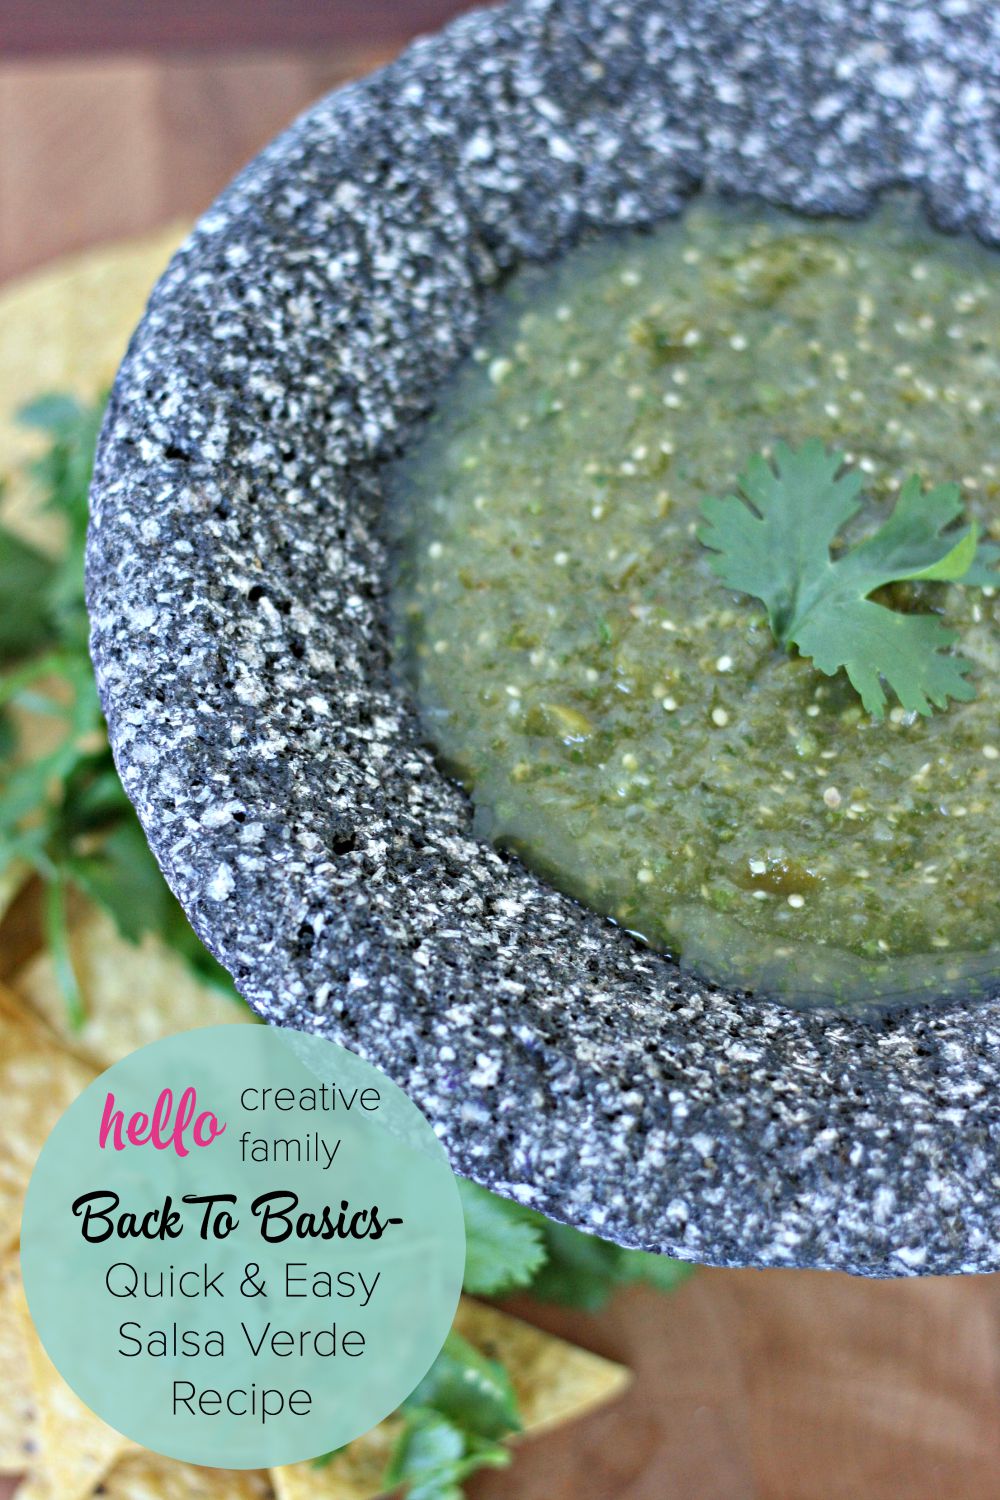 This delicious, quick and easy salsa verde recipe is a great staple recipe. Versatile, it's perfect with Mexican food or on top of grilled meat and fish.